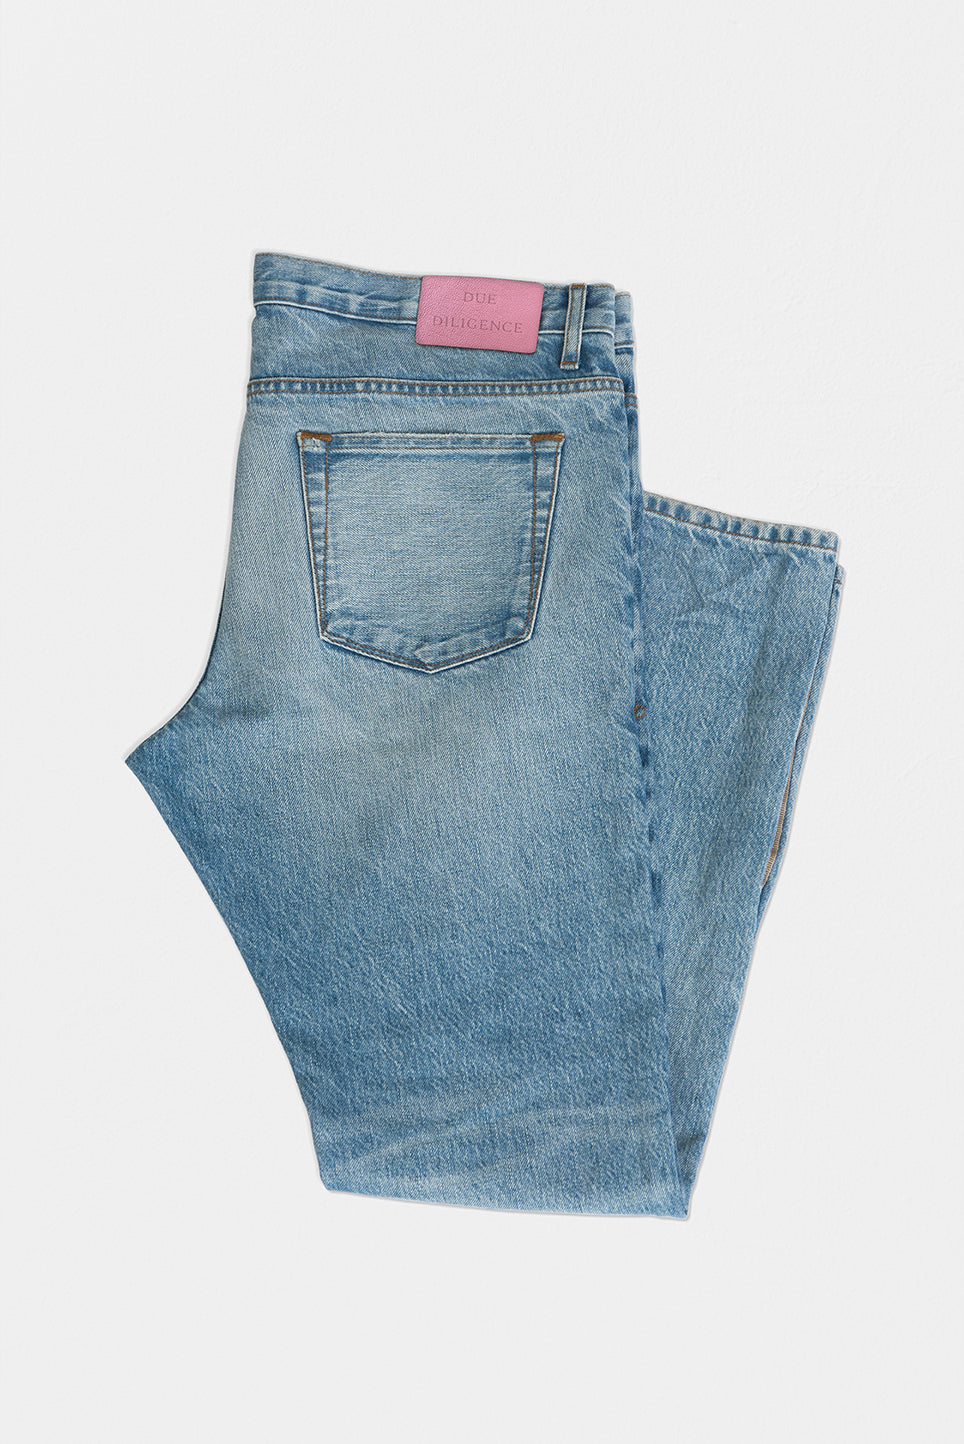 Mid Wash Jeans - Due Diligence Apparel